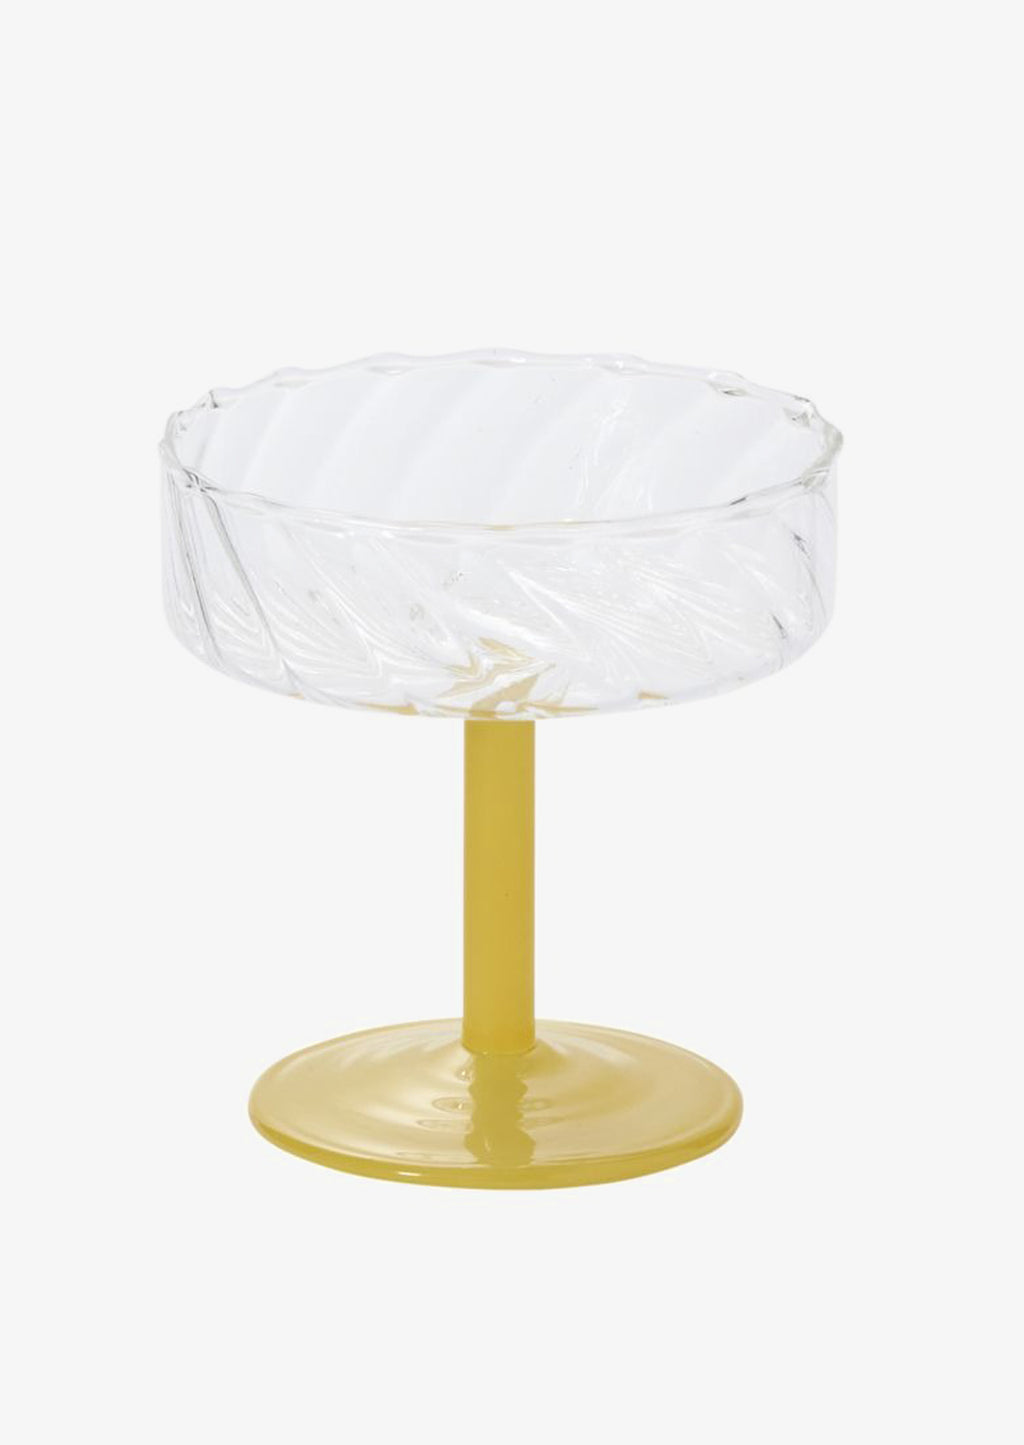 2: A fluted coupe glass with opaque yellow glass stem.